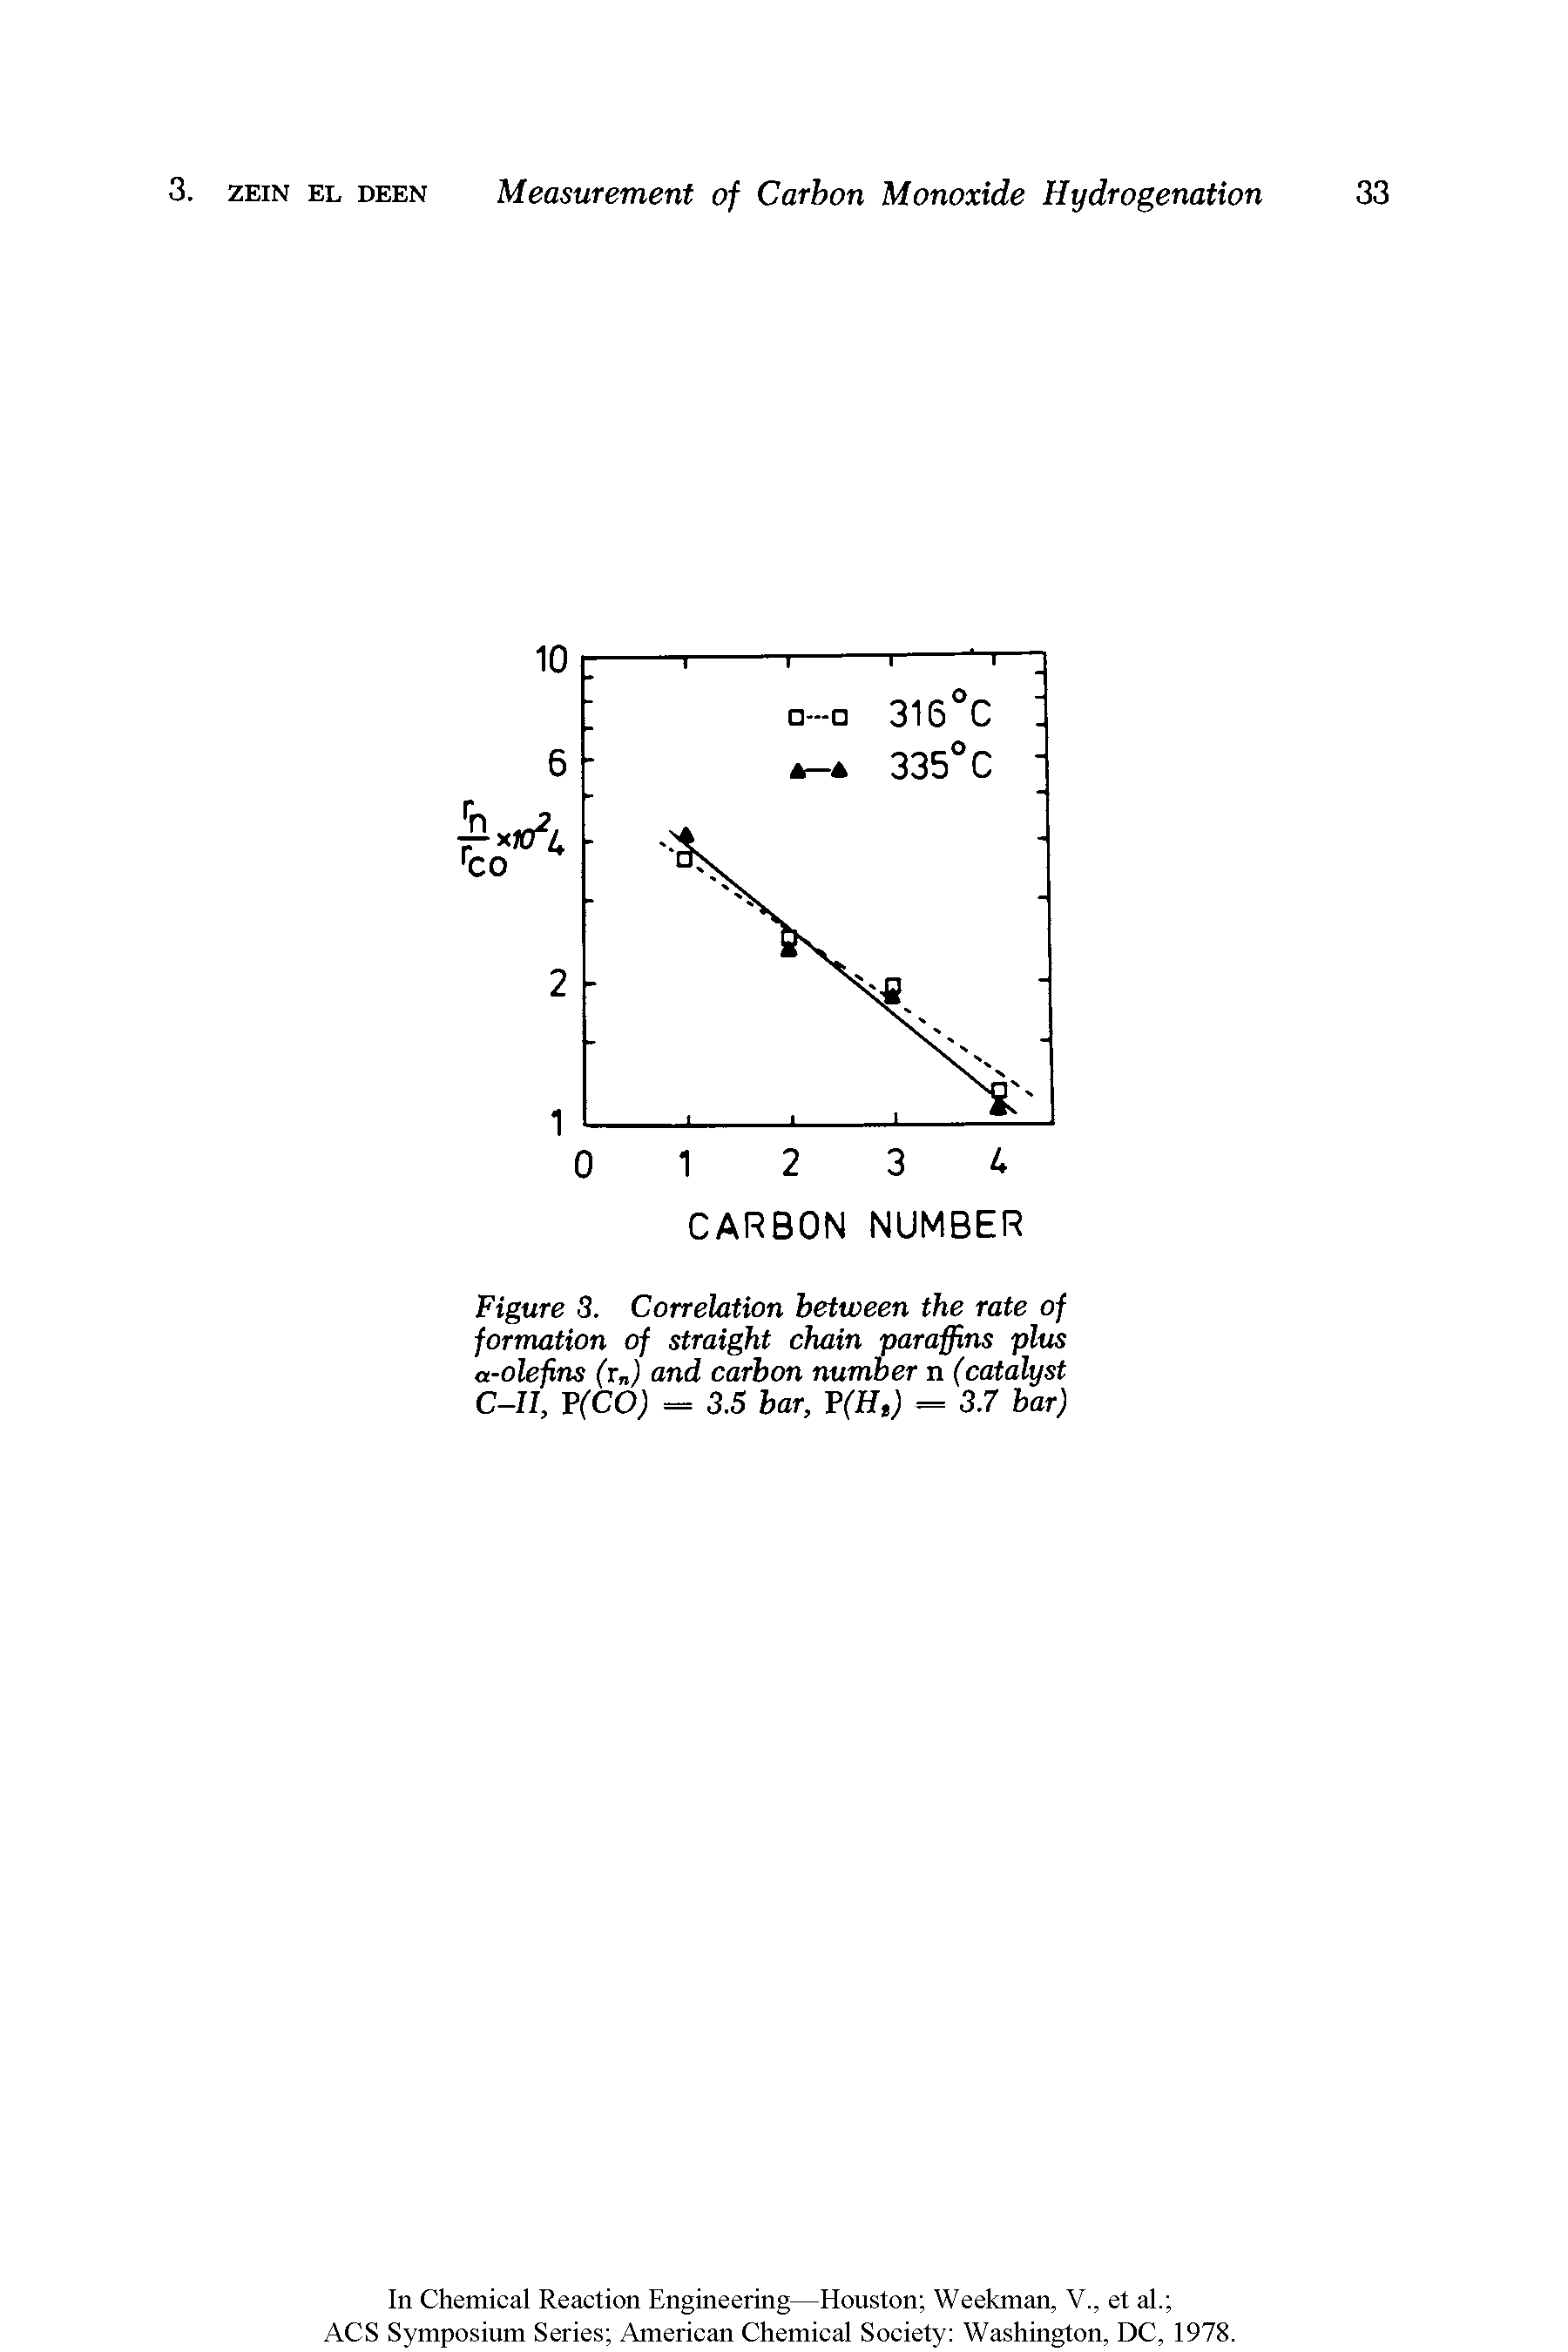 Figure 3. Correlation between the rate of formation of straight chain paraffins plus a-olefins (r ) and carbon number n (catalyst C-II, F(CO) = 3.5 bar, V(H,) = 3.7 bar)...